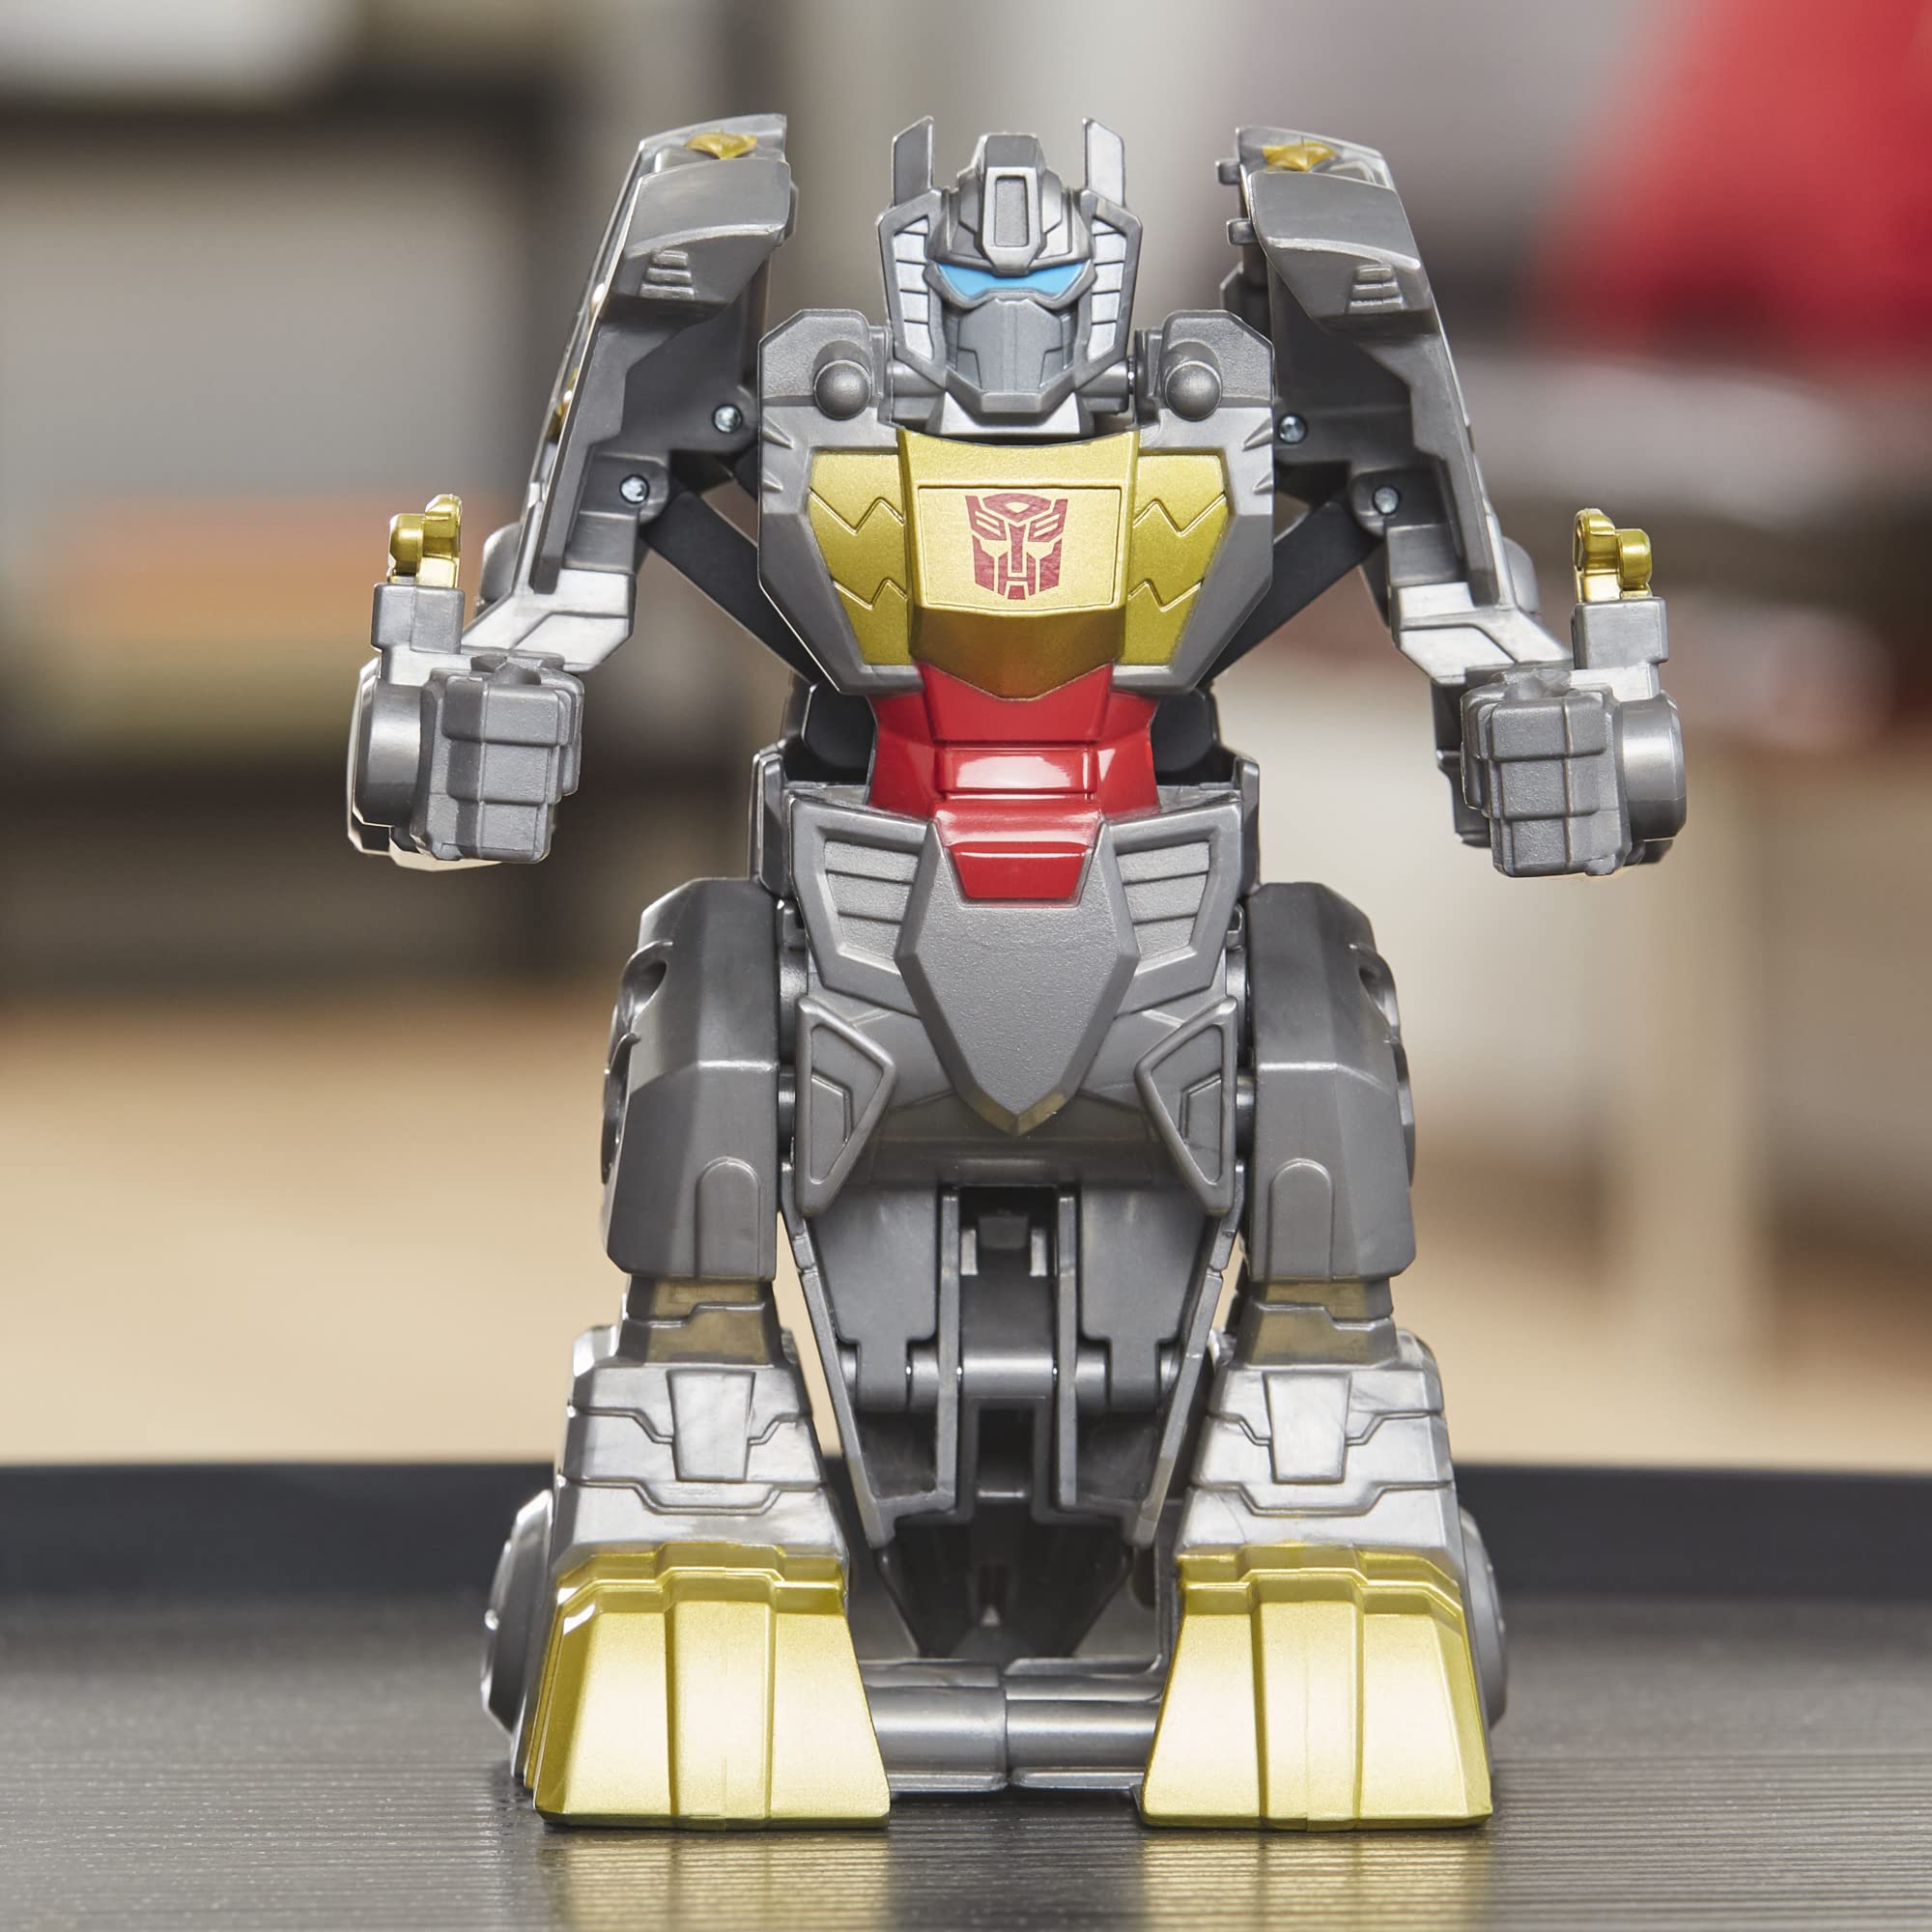 Transformers Classic Heroes Team Grimlock Converting Toy, 4.5-Inch Action Figure, for Kids Ages 3 and Up